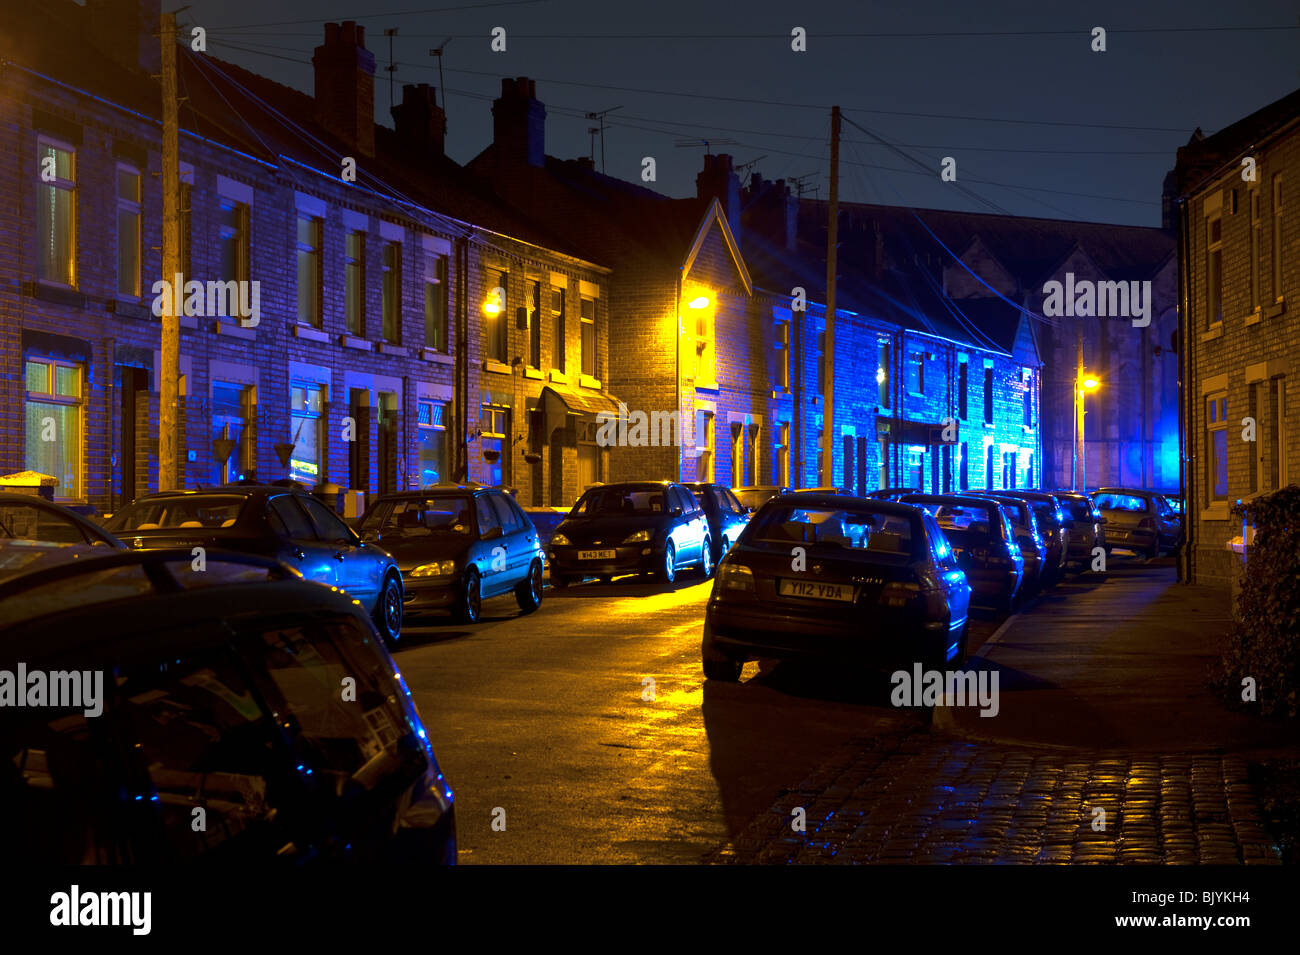 Terraced houses lit up by eerie blue light at night Stock Photo